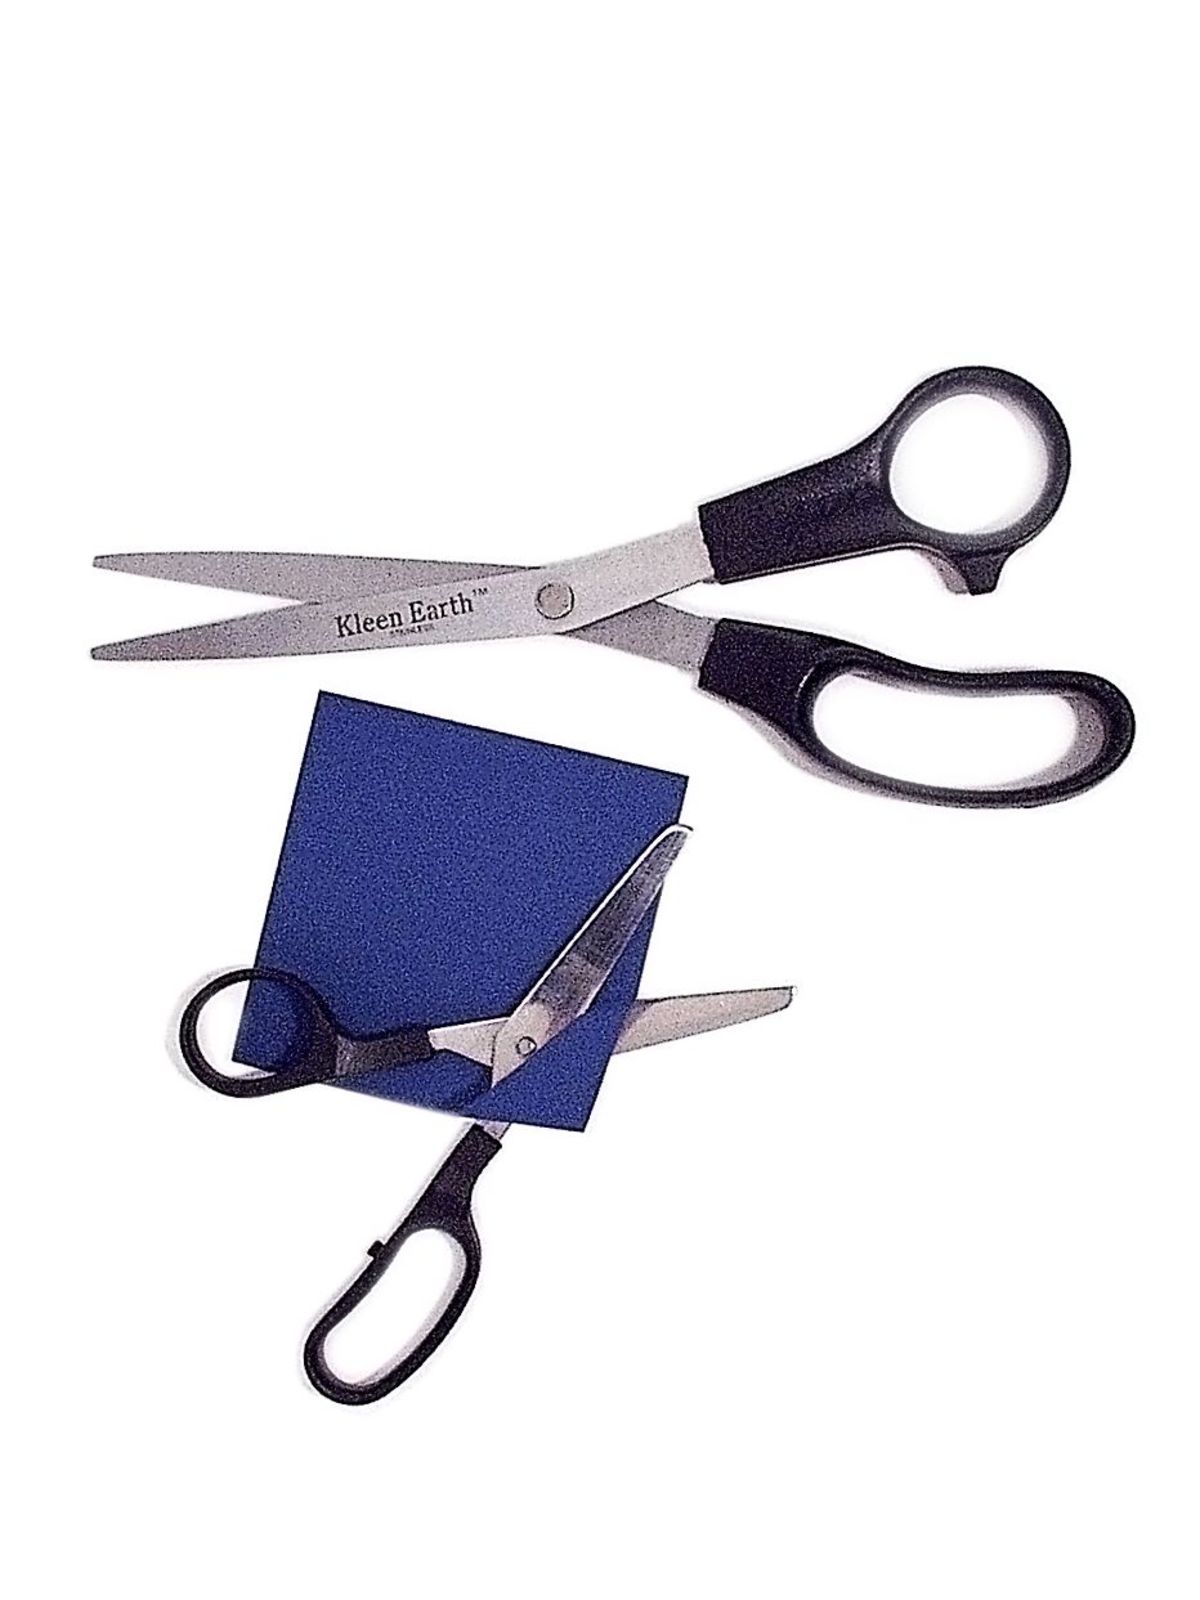 Kleen Earth Recycled Shears 8 In. Stainless Steel Shears